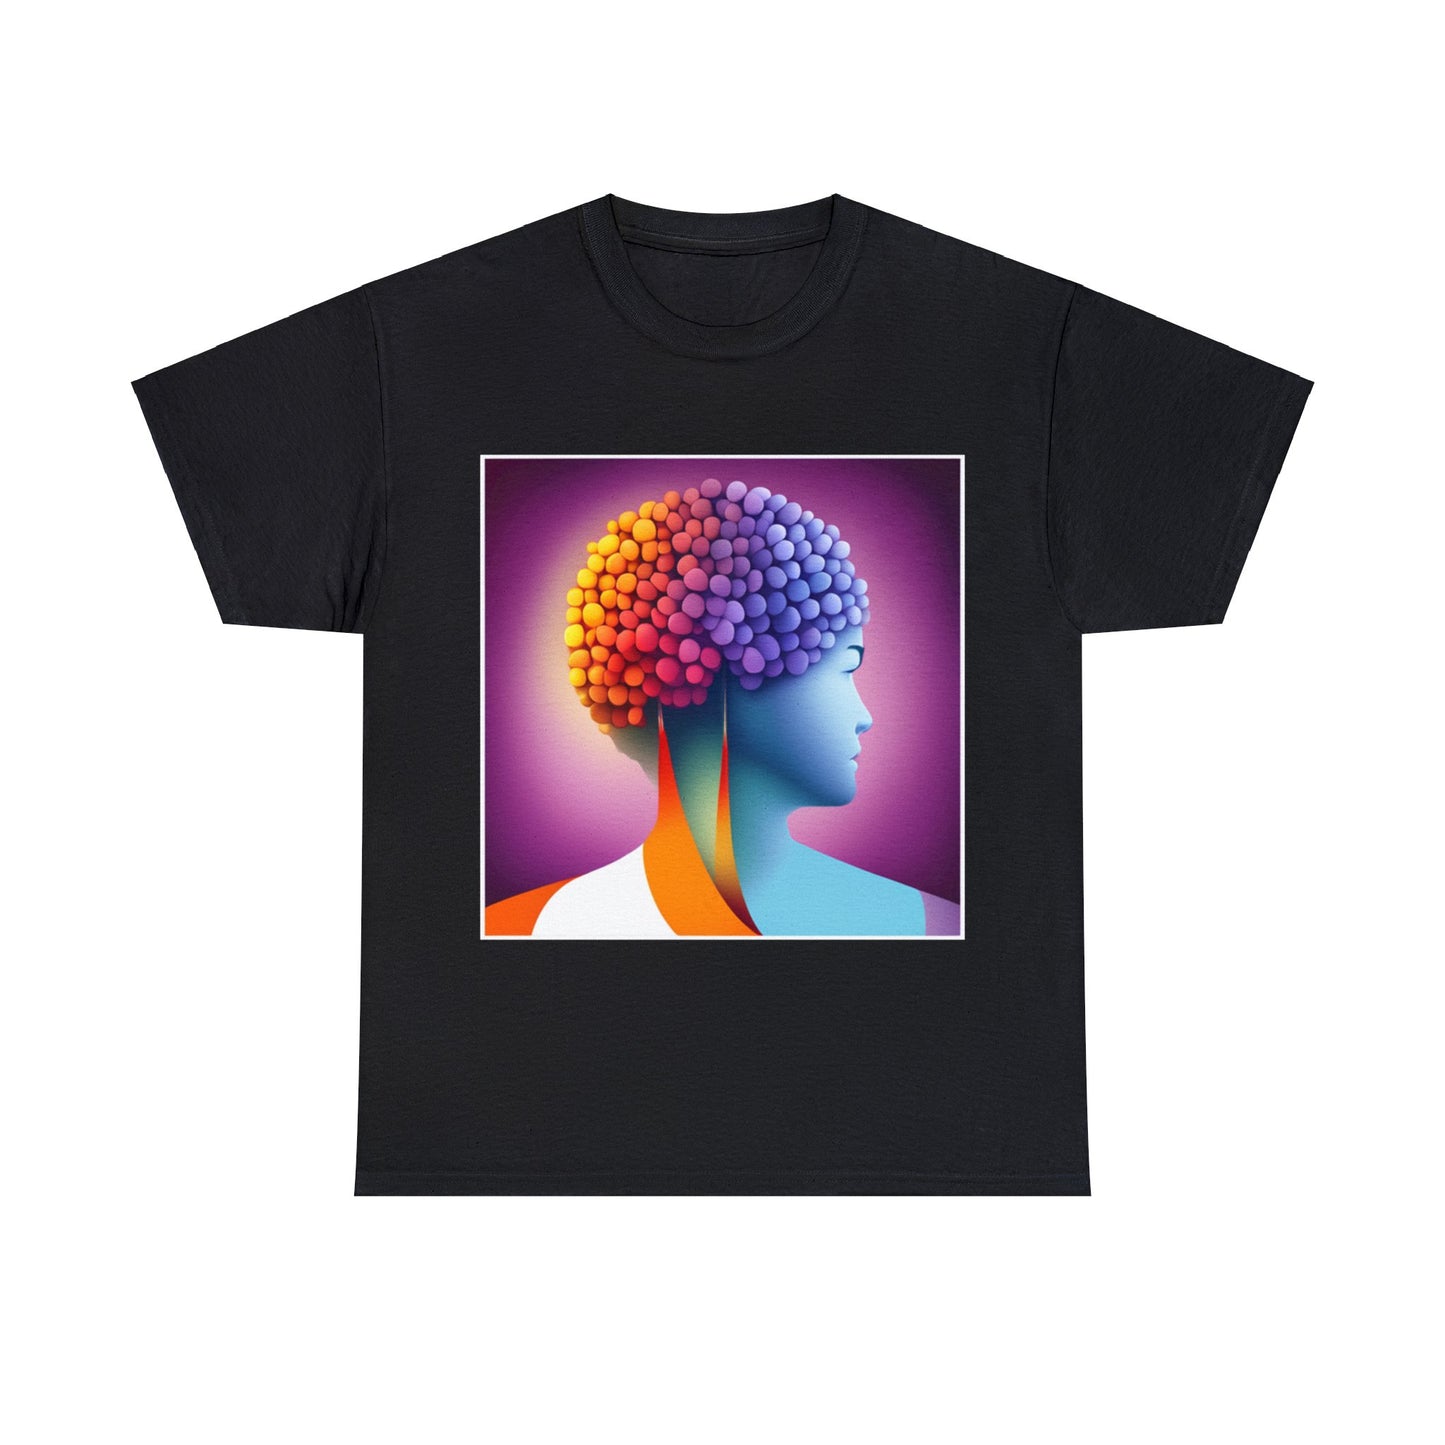 Mind Matters Too Cotton Tee